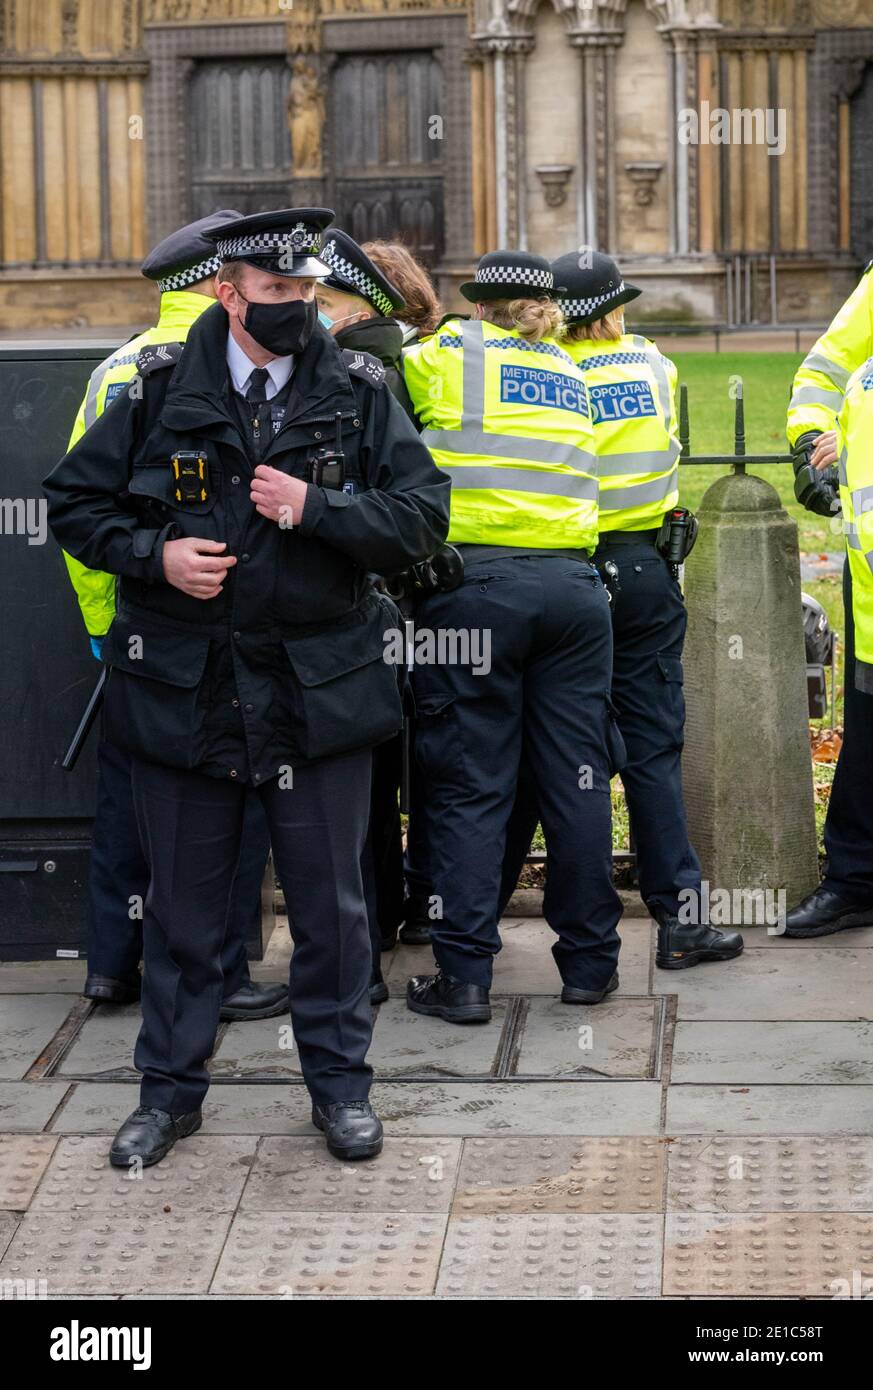 London, UK. 6th Jan, 2021. Small groups of anti lockdown protesters were in Parliament Square for the one day recall of the UK Parliament. Metropolitan police arrested many demonstrators using the lockdown regulations. Credit: Ian Davidson/Alamy Live News Stock Photo